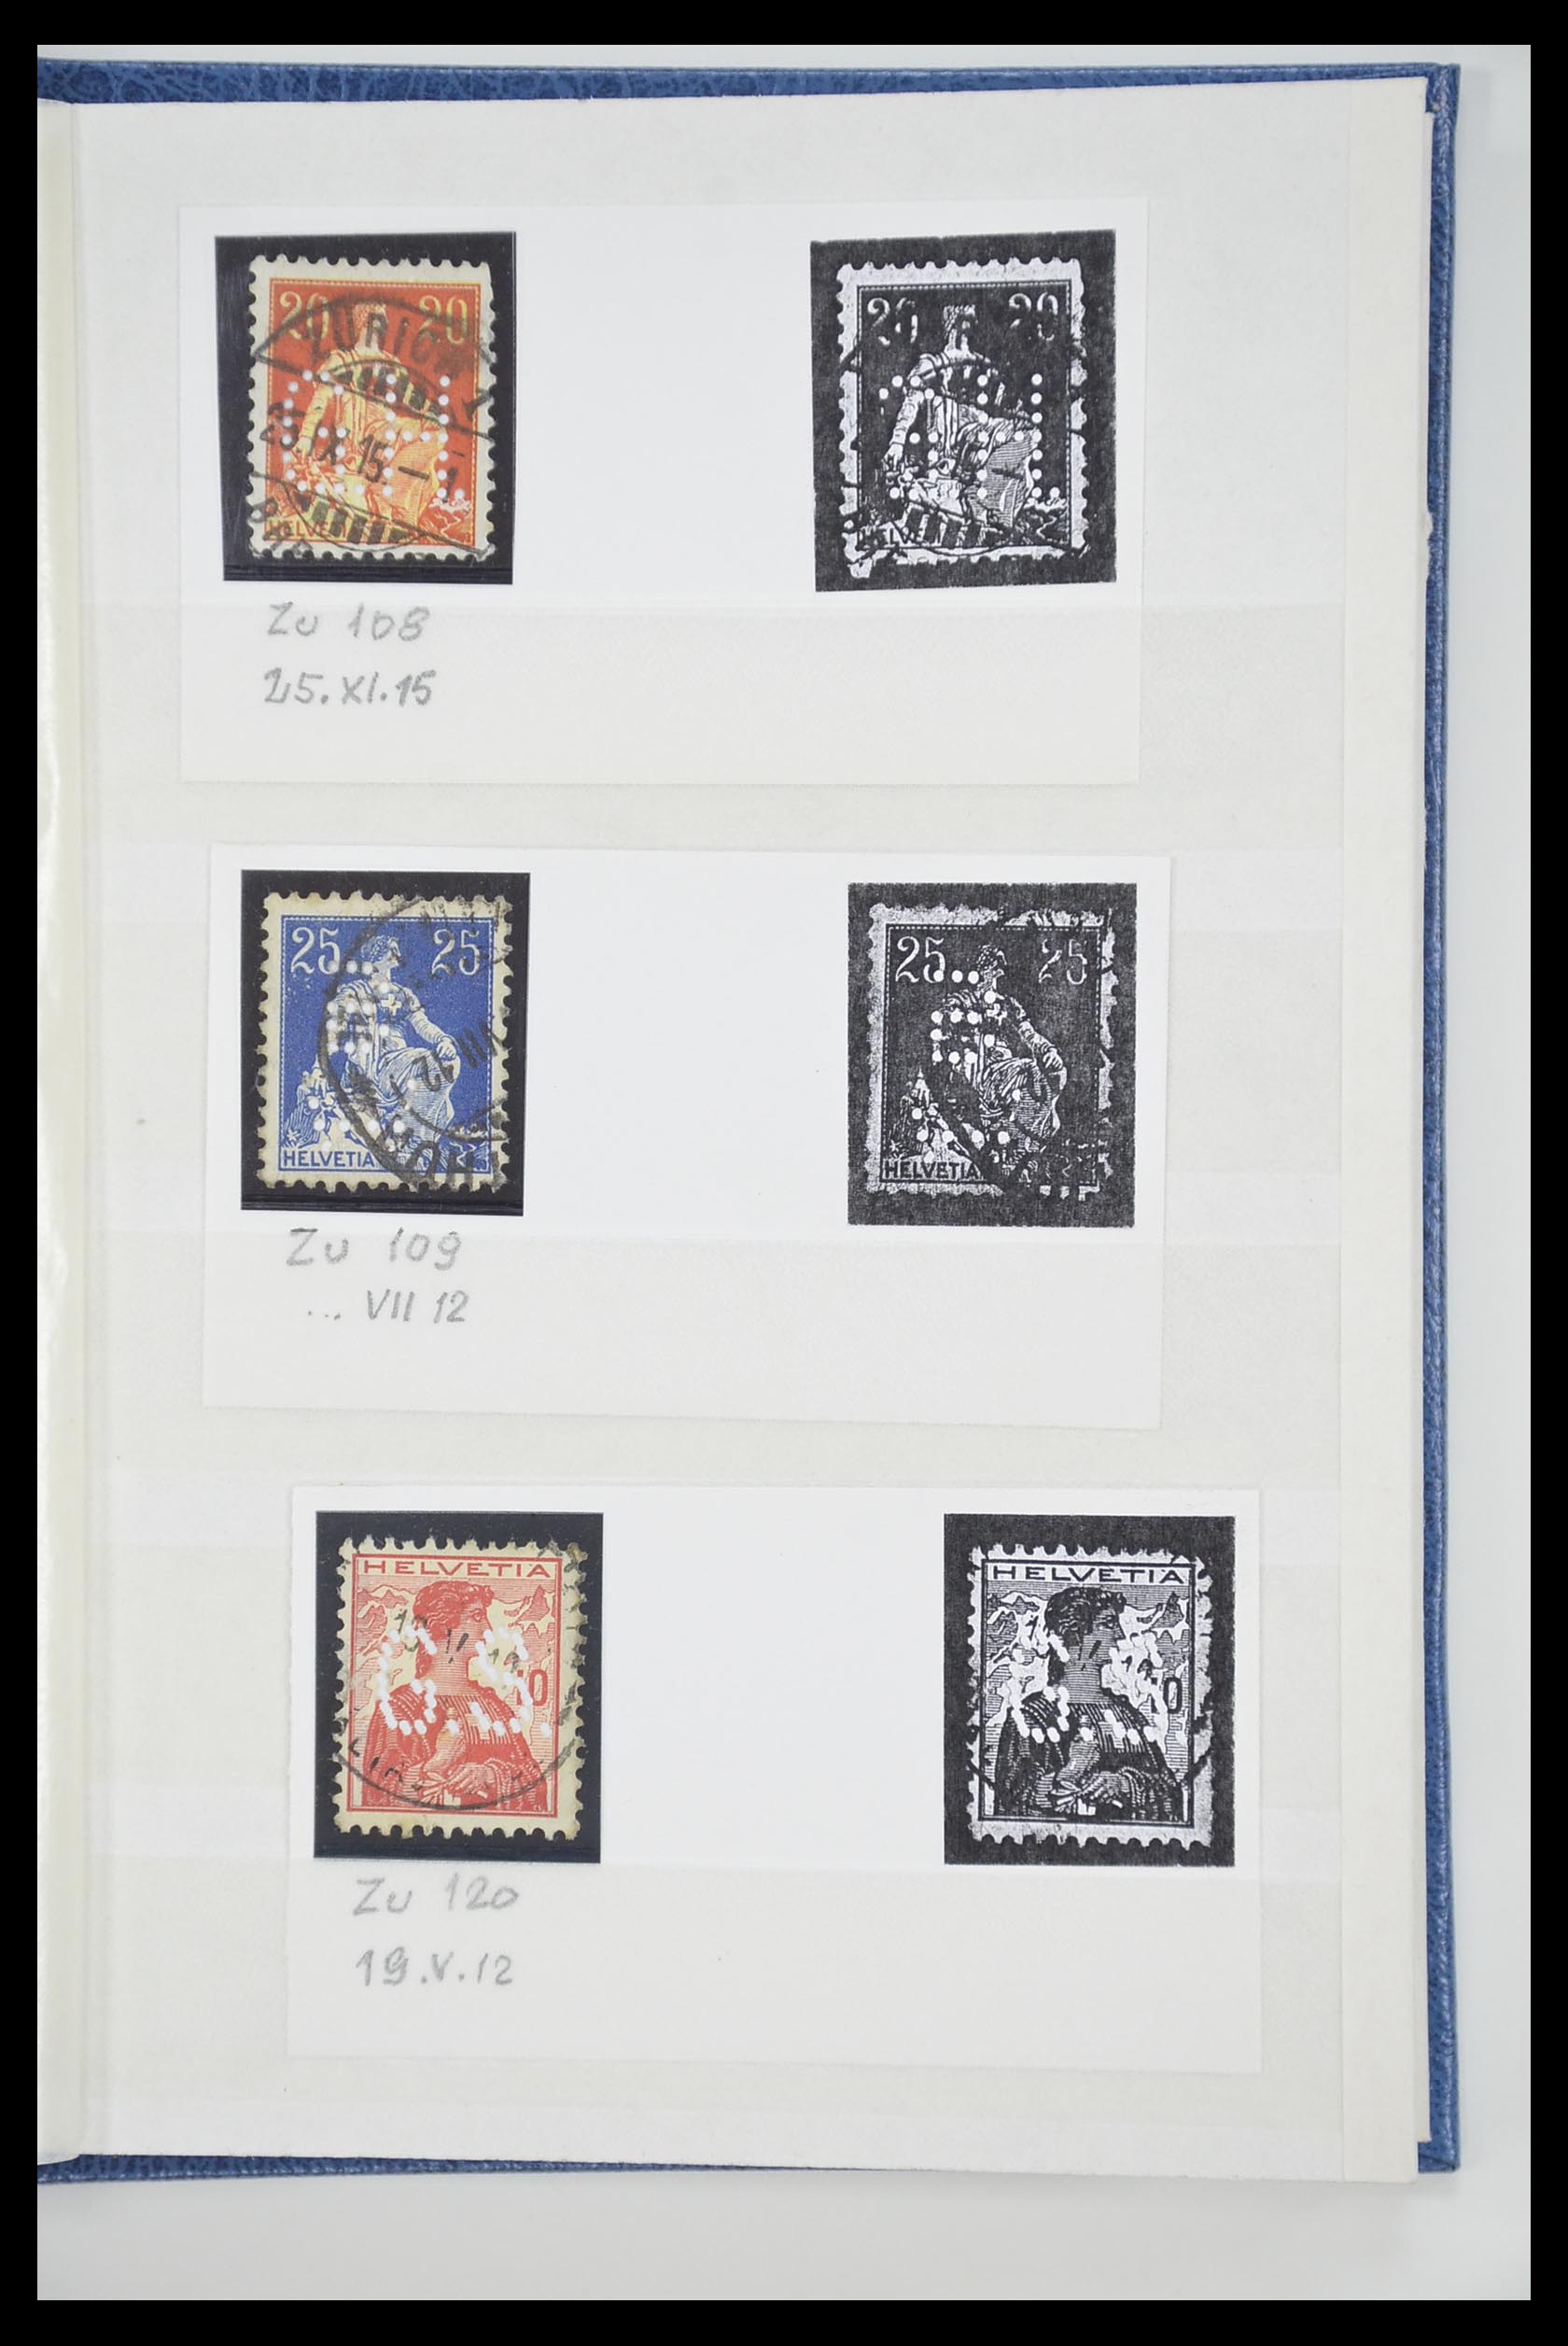 33284 040 - Stamp collection 33284 Switzerland better issues 1900-1995.